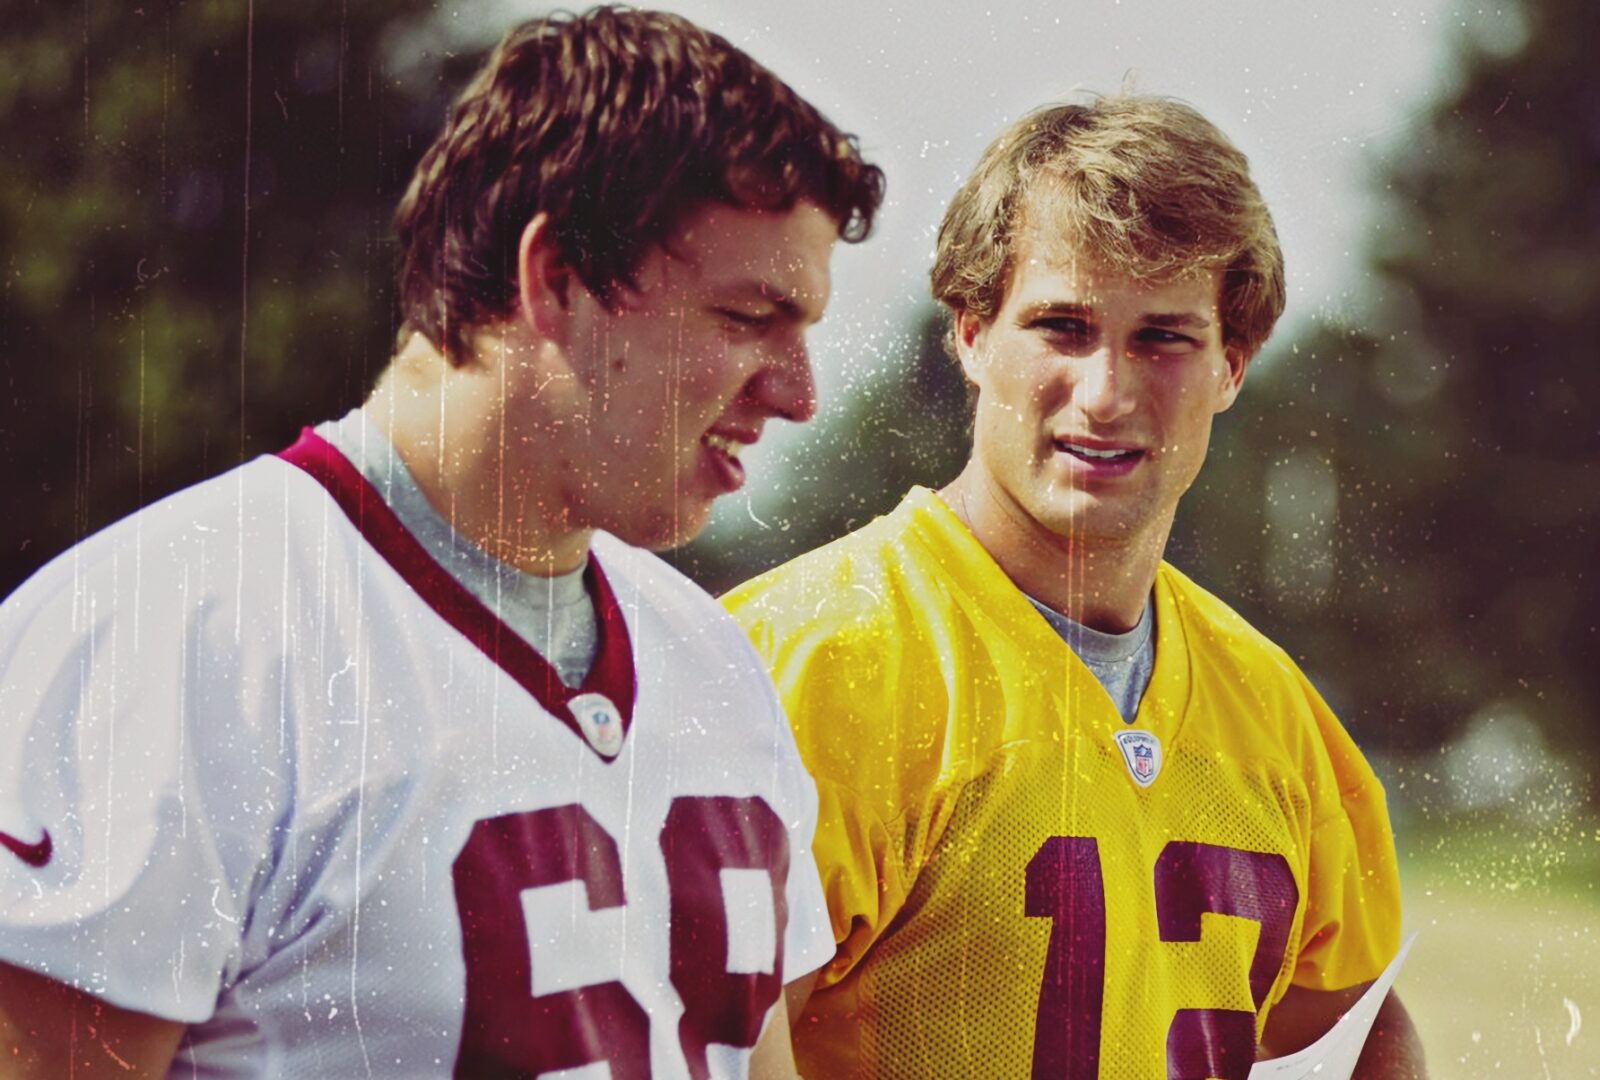 Nice guy or phony? The two very different faces of Kirk Cousins